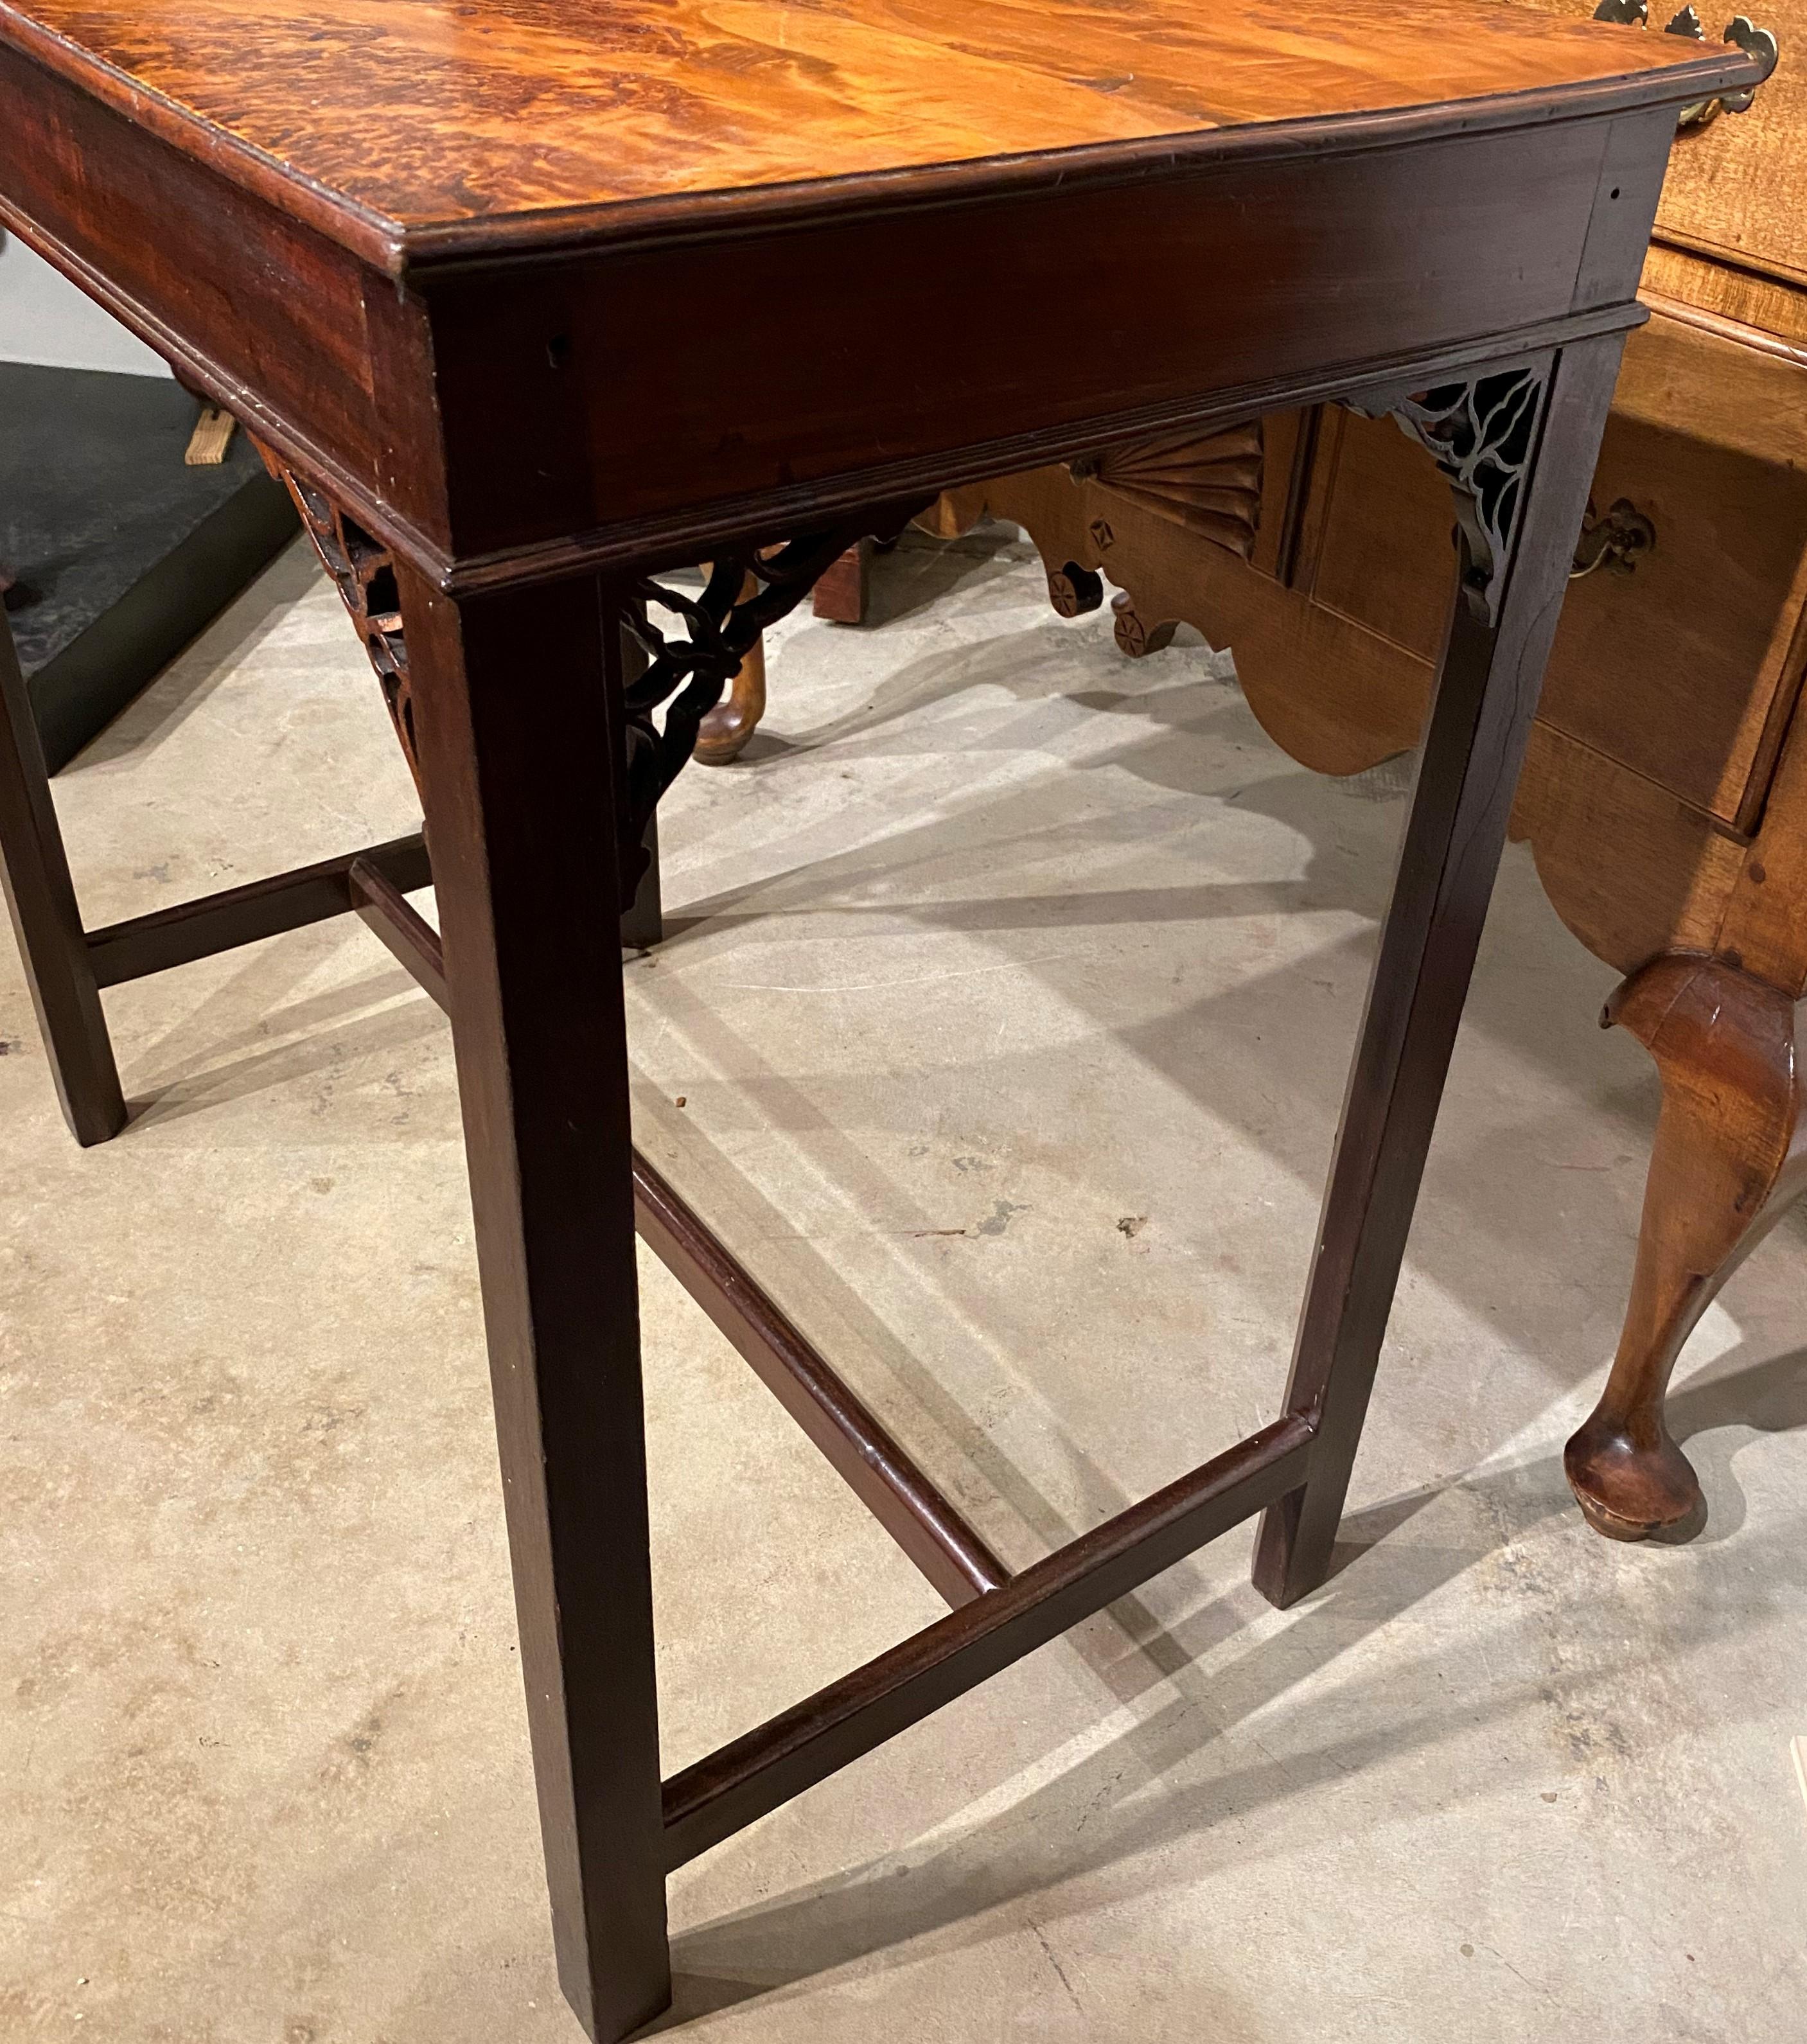 19th c English Mahogany Tea Table with Fretwork and Burled Yew Wood Top In Good Condition For Sale In Milford, NH